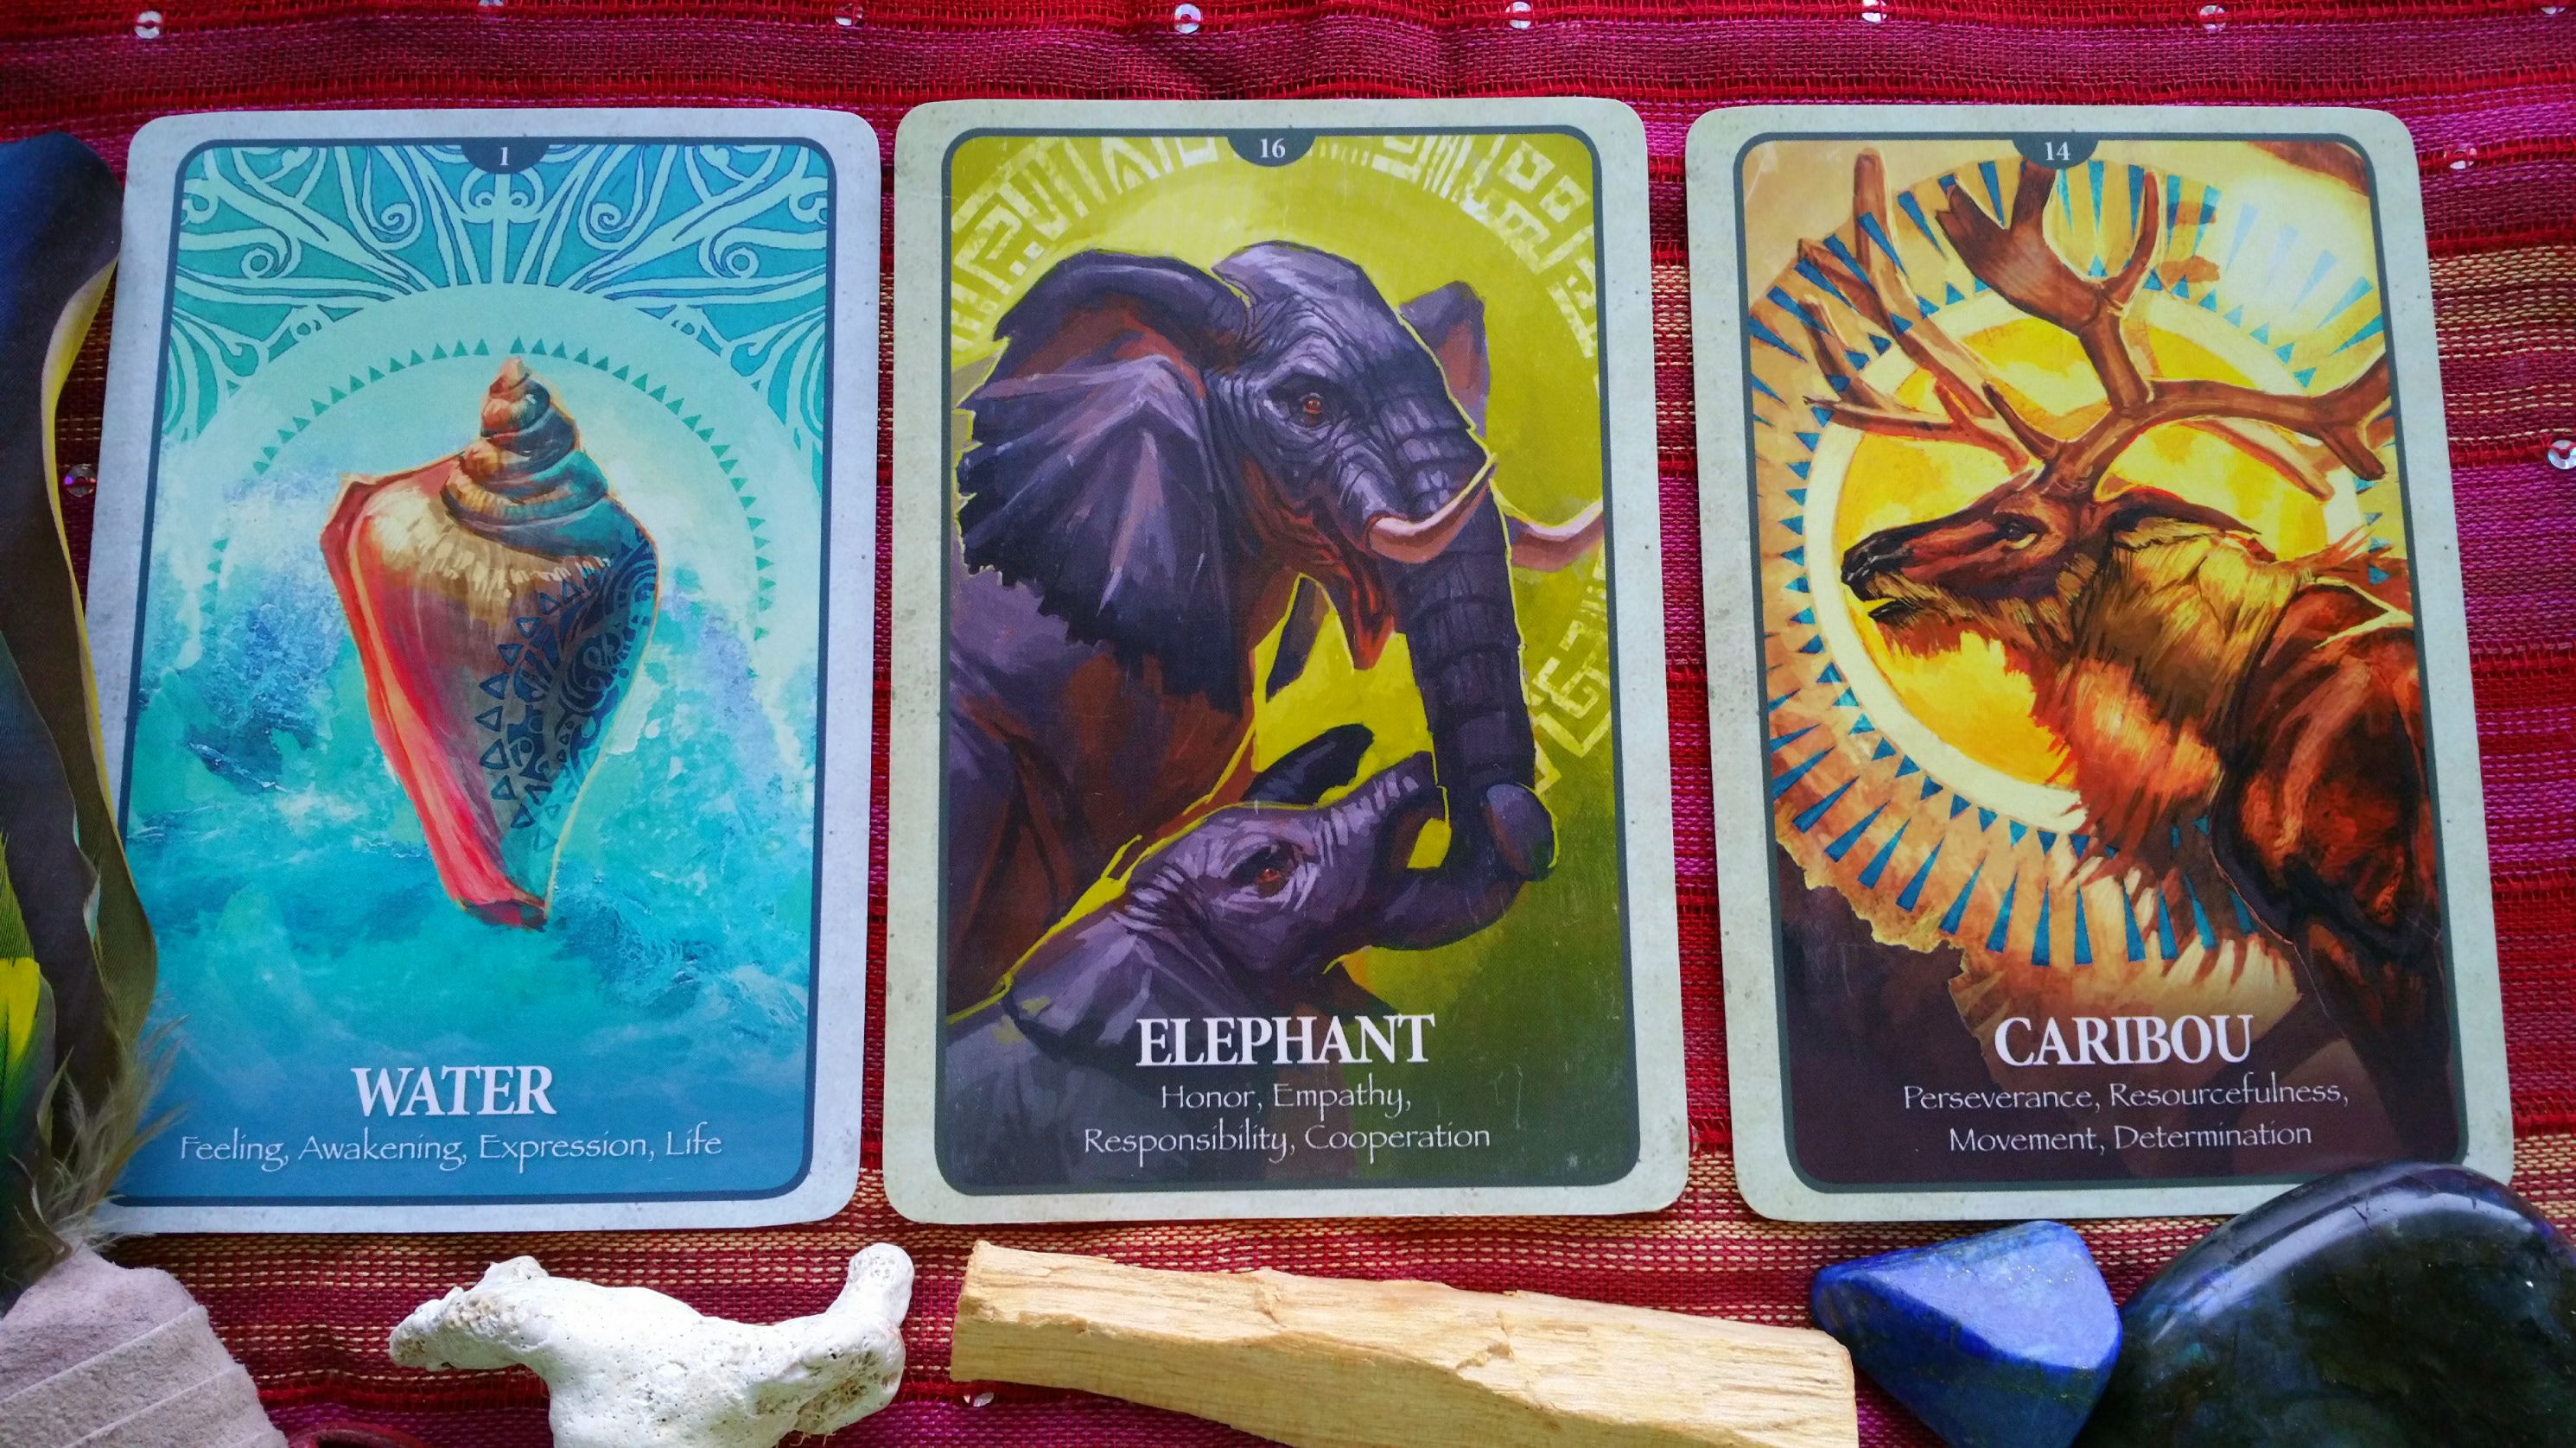 Psychic Faire Jan 2019 Animal Dreaming Oracle Cards by Scott Alexander King - http://animaldreaming.com/shop/oracle-tarot/animal-dreaming-oracle-cards/